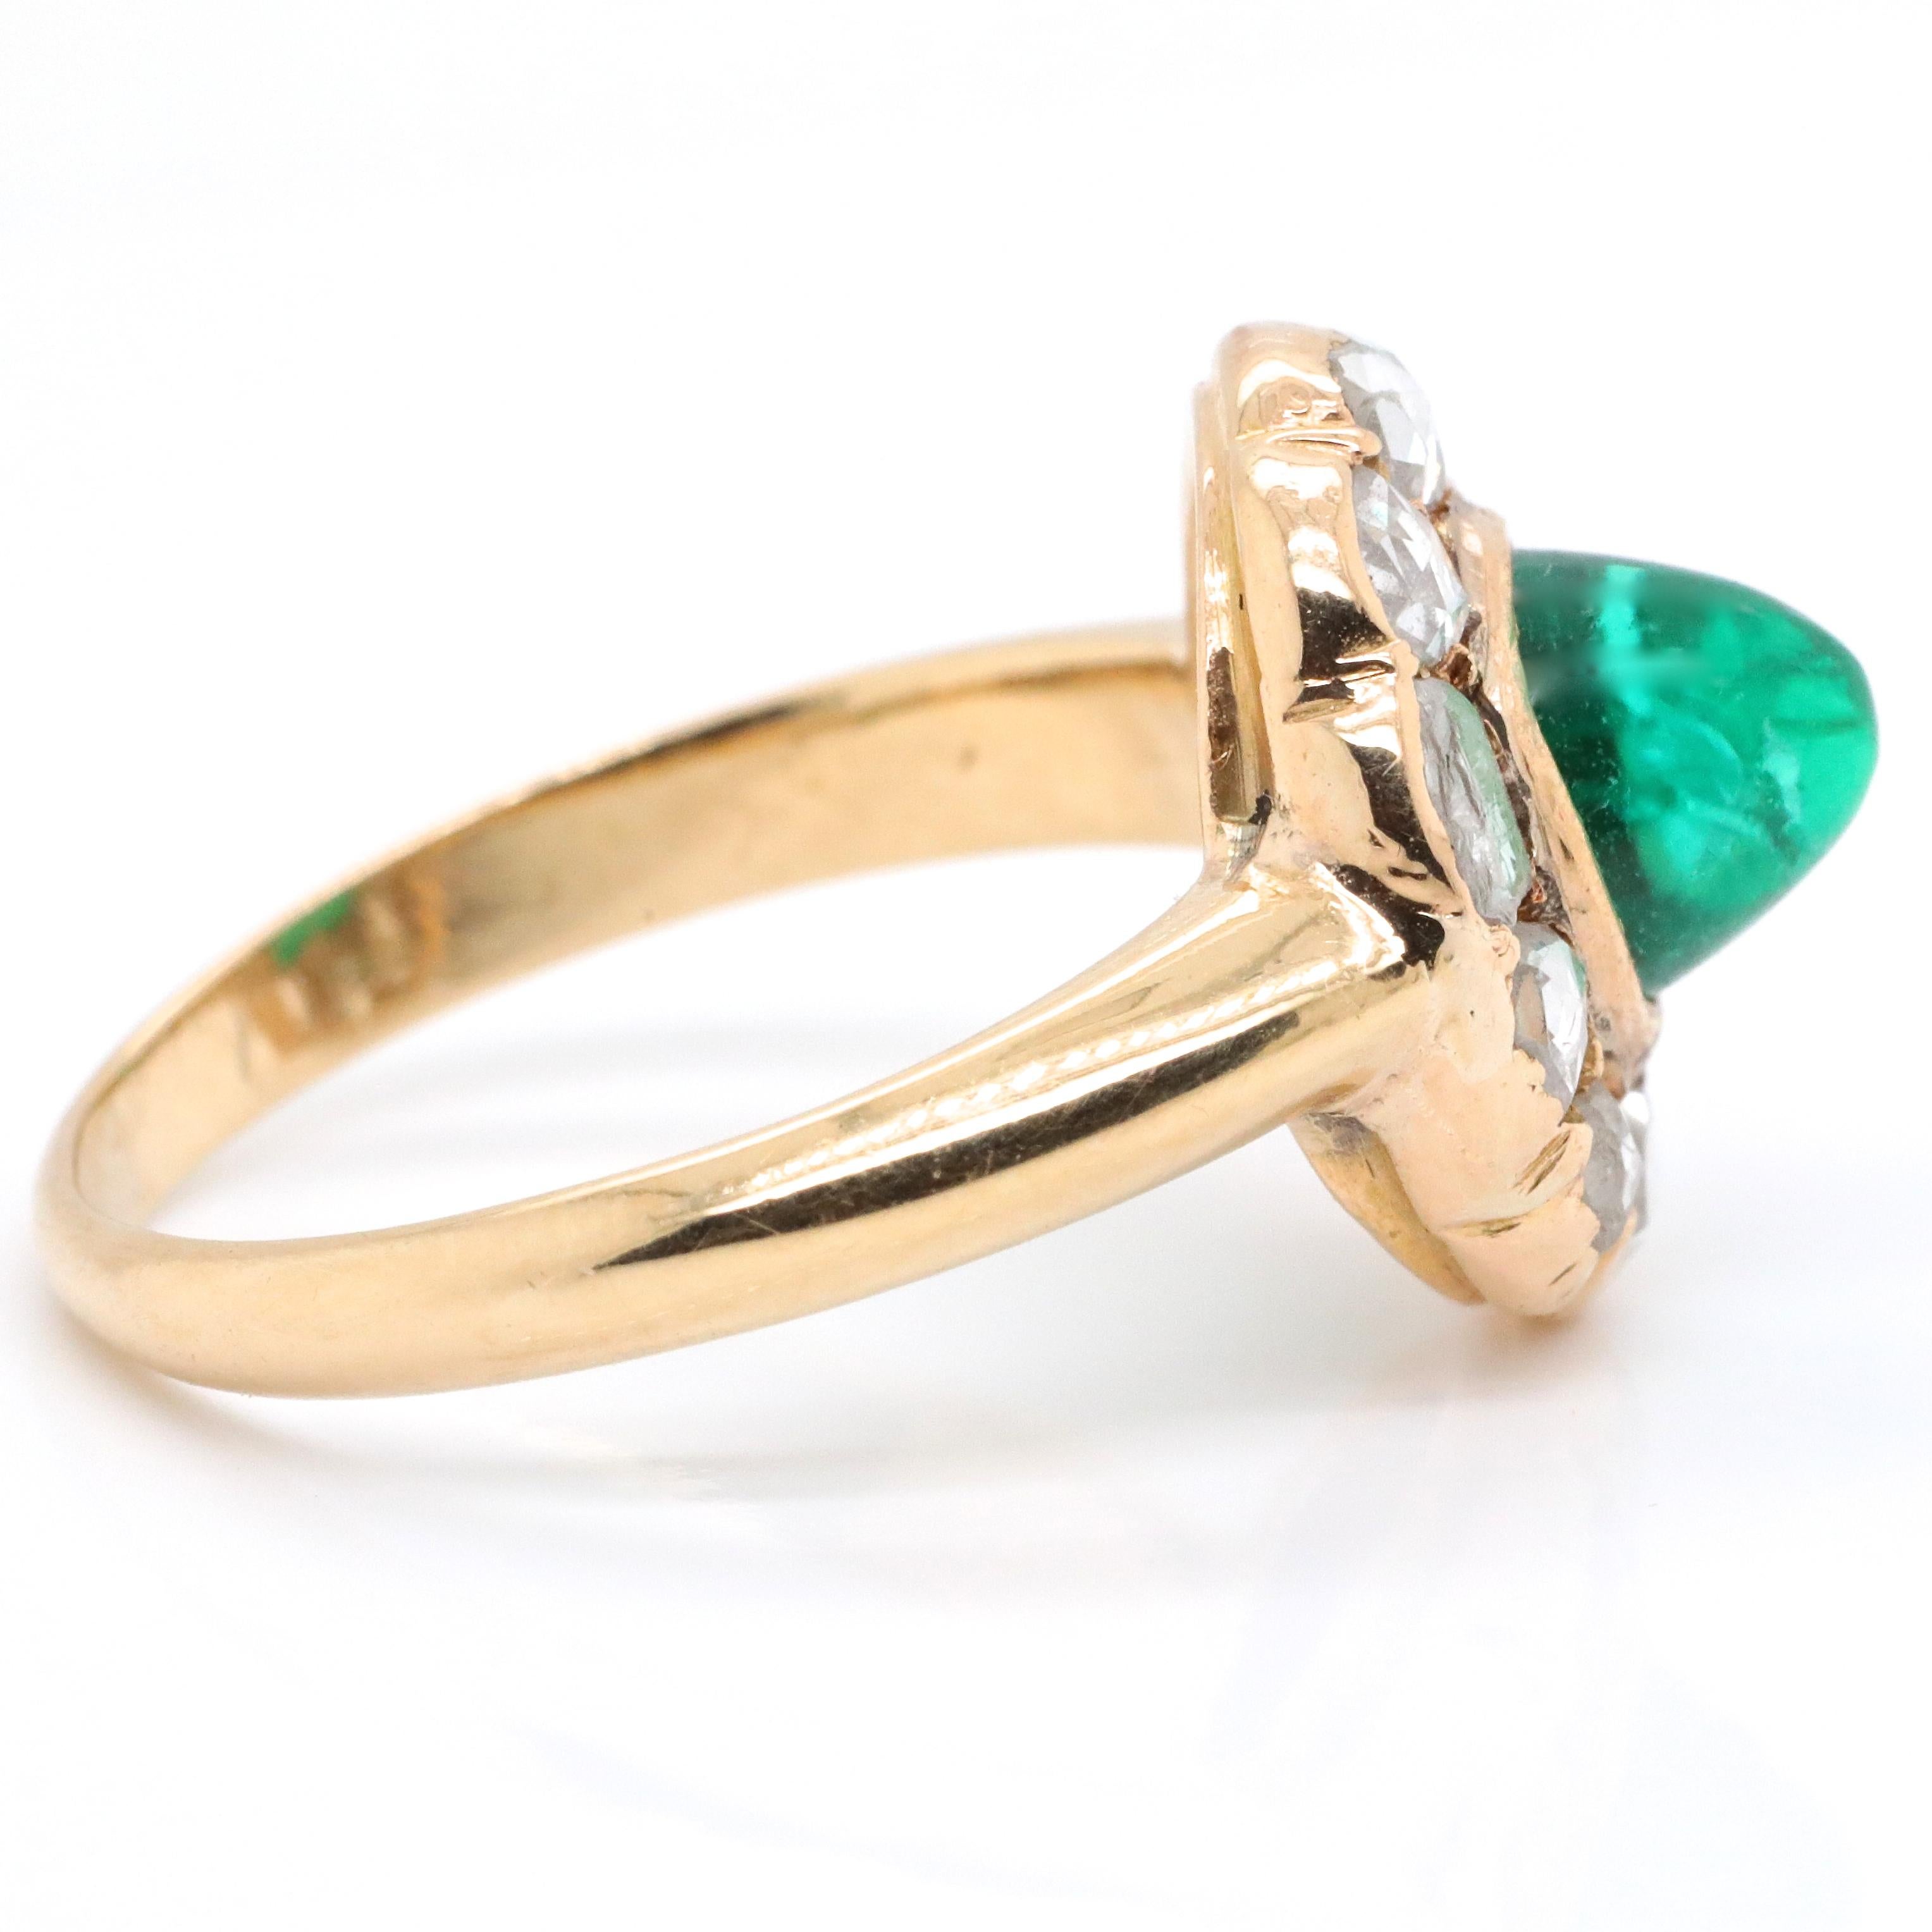 You will be happy to look at this beautiful translucent emerald full of color and brilliance; and every day you will be delighted with it.  Designed in the tradition of Iberian style rings. This is a Vintage GIA Columbian Emerald 18k Gold Ring. The